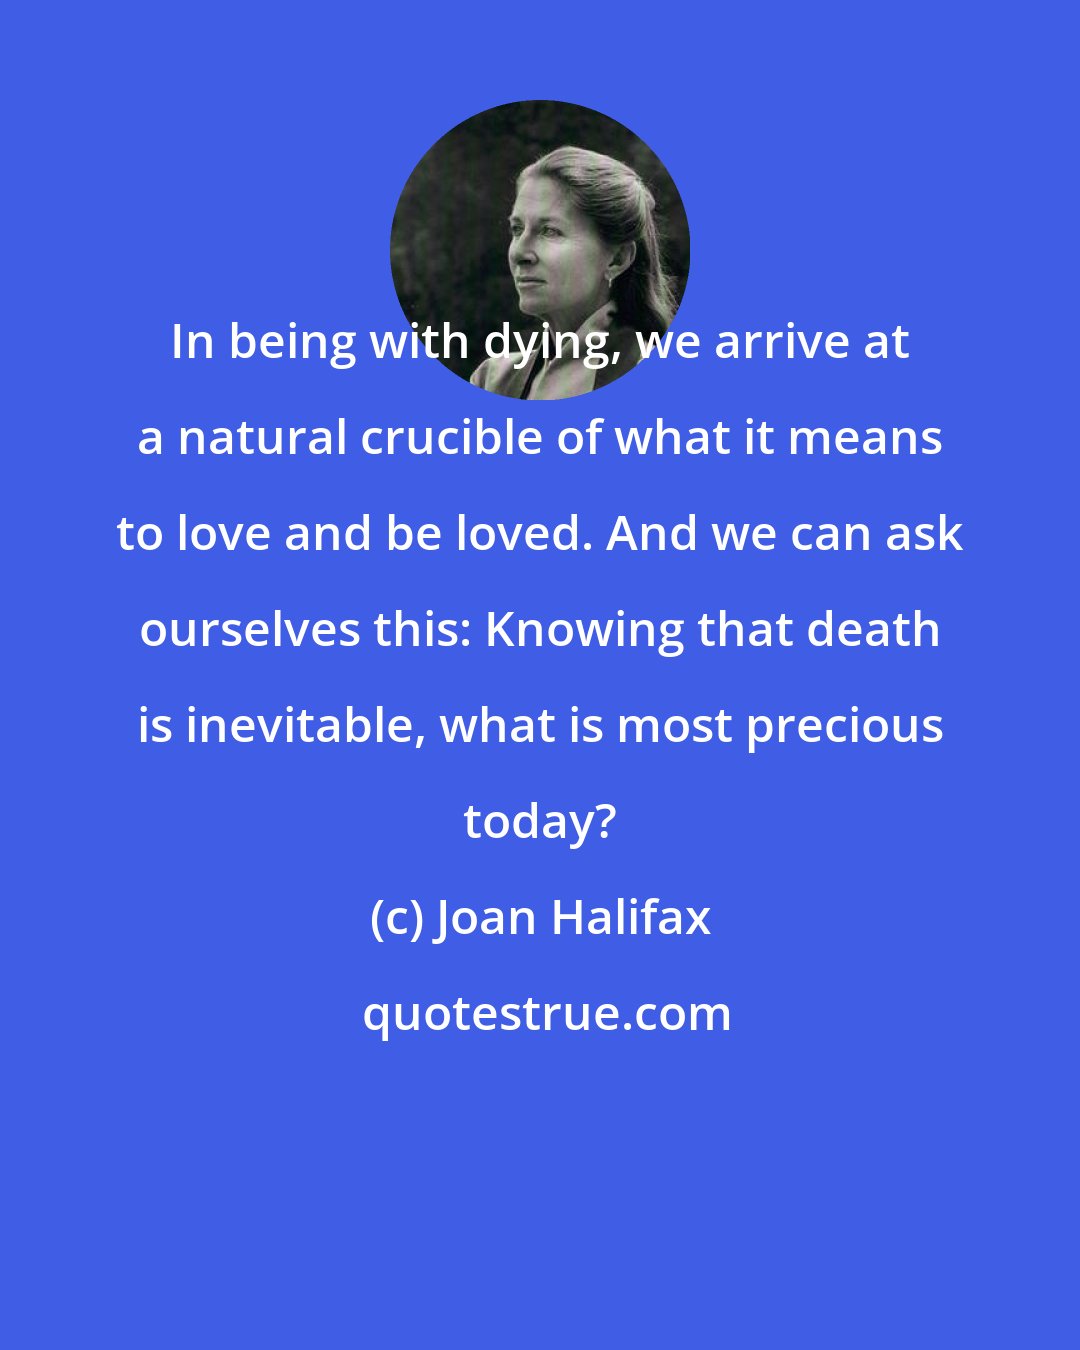 Joan Halifax: In being with dying, we arrive at a natural crucible of what it means to love and be loved. And we can ask ourselves this: Knowing that death is inevitable, what is most precious today?